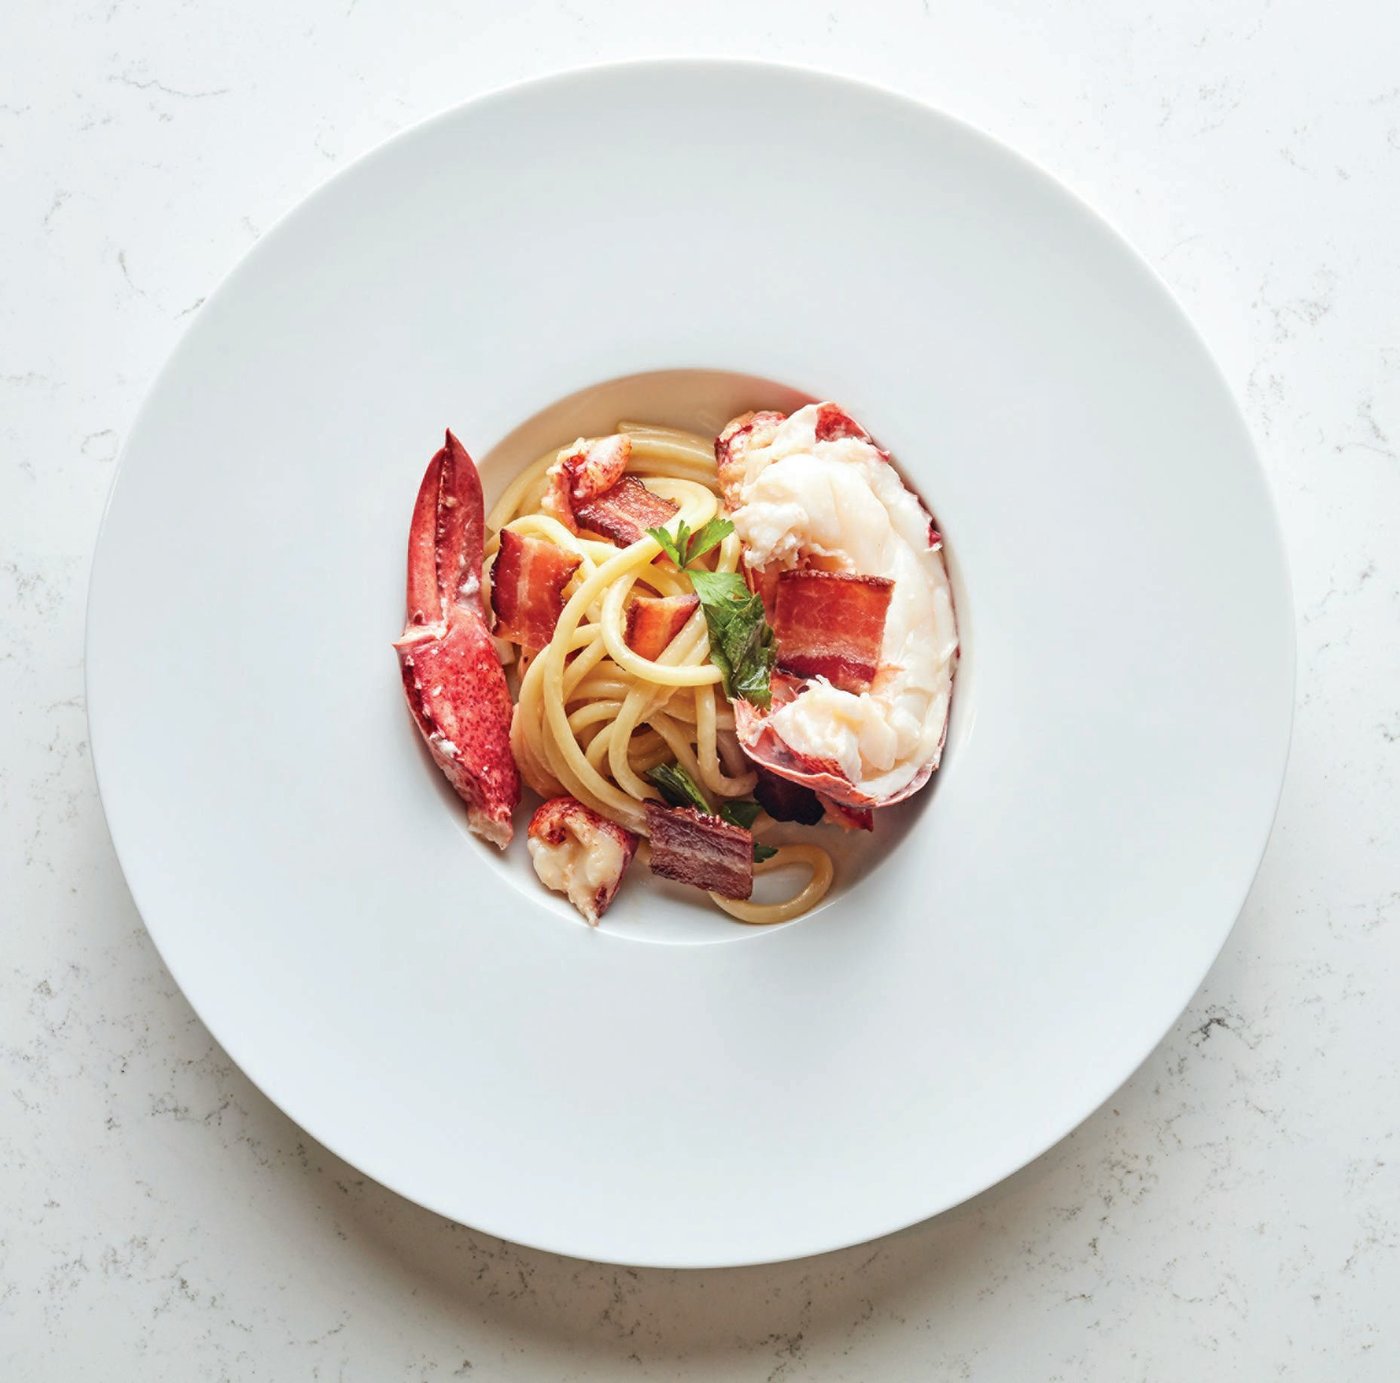 Adorn’s lobster and spaghetti “Joe Beef” style celebrates one of Montreal’s great restaurants—as well as, notes chef Jonathon Sawyer, “East Coast freezing-cold water, Canadian lobsters, great bucatini and just a little bit of cognac and cream for good luck.” PHOTO BY HAAS AND HAAS PHOTOGRAPHY